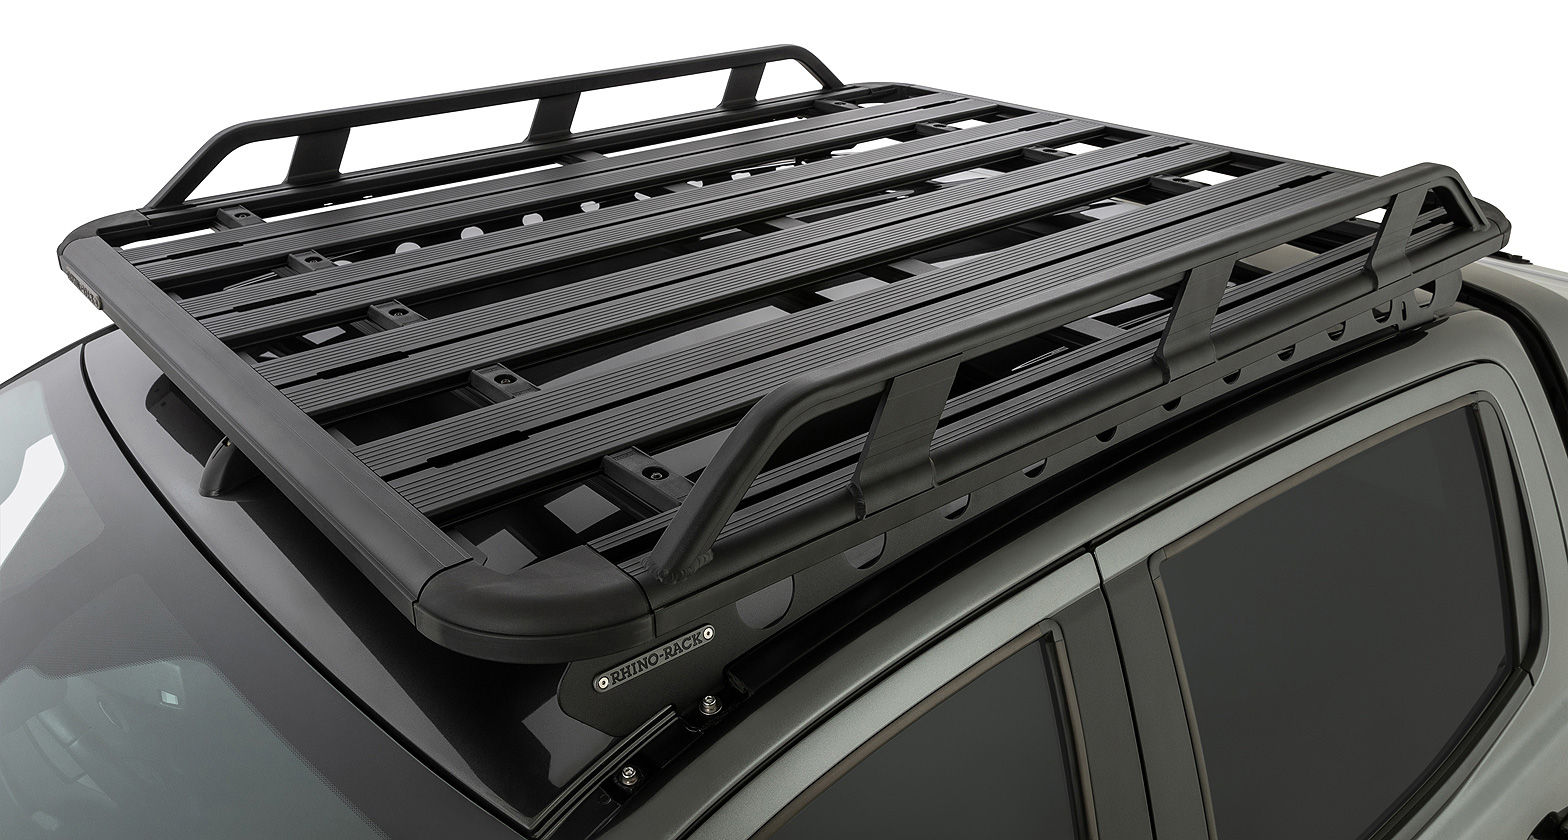 Rhino Rack JB0264 Pioneer Tradie (1528mm x 1236mm) for Ford Ranger PX-PX2-PX3 Wildtrak 4dr Ute with Raised Roof Rail (2011 to 2022) - Custom Point Mount